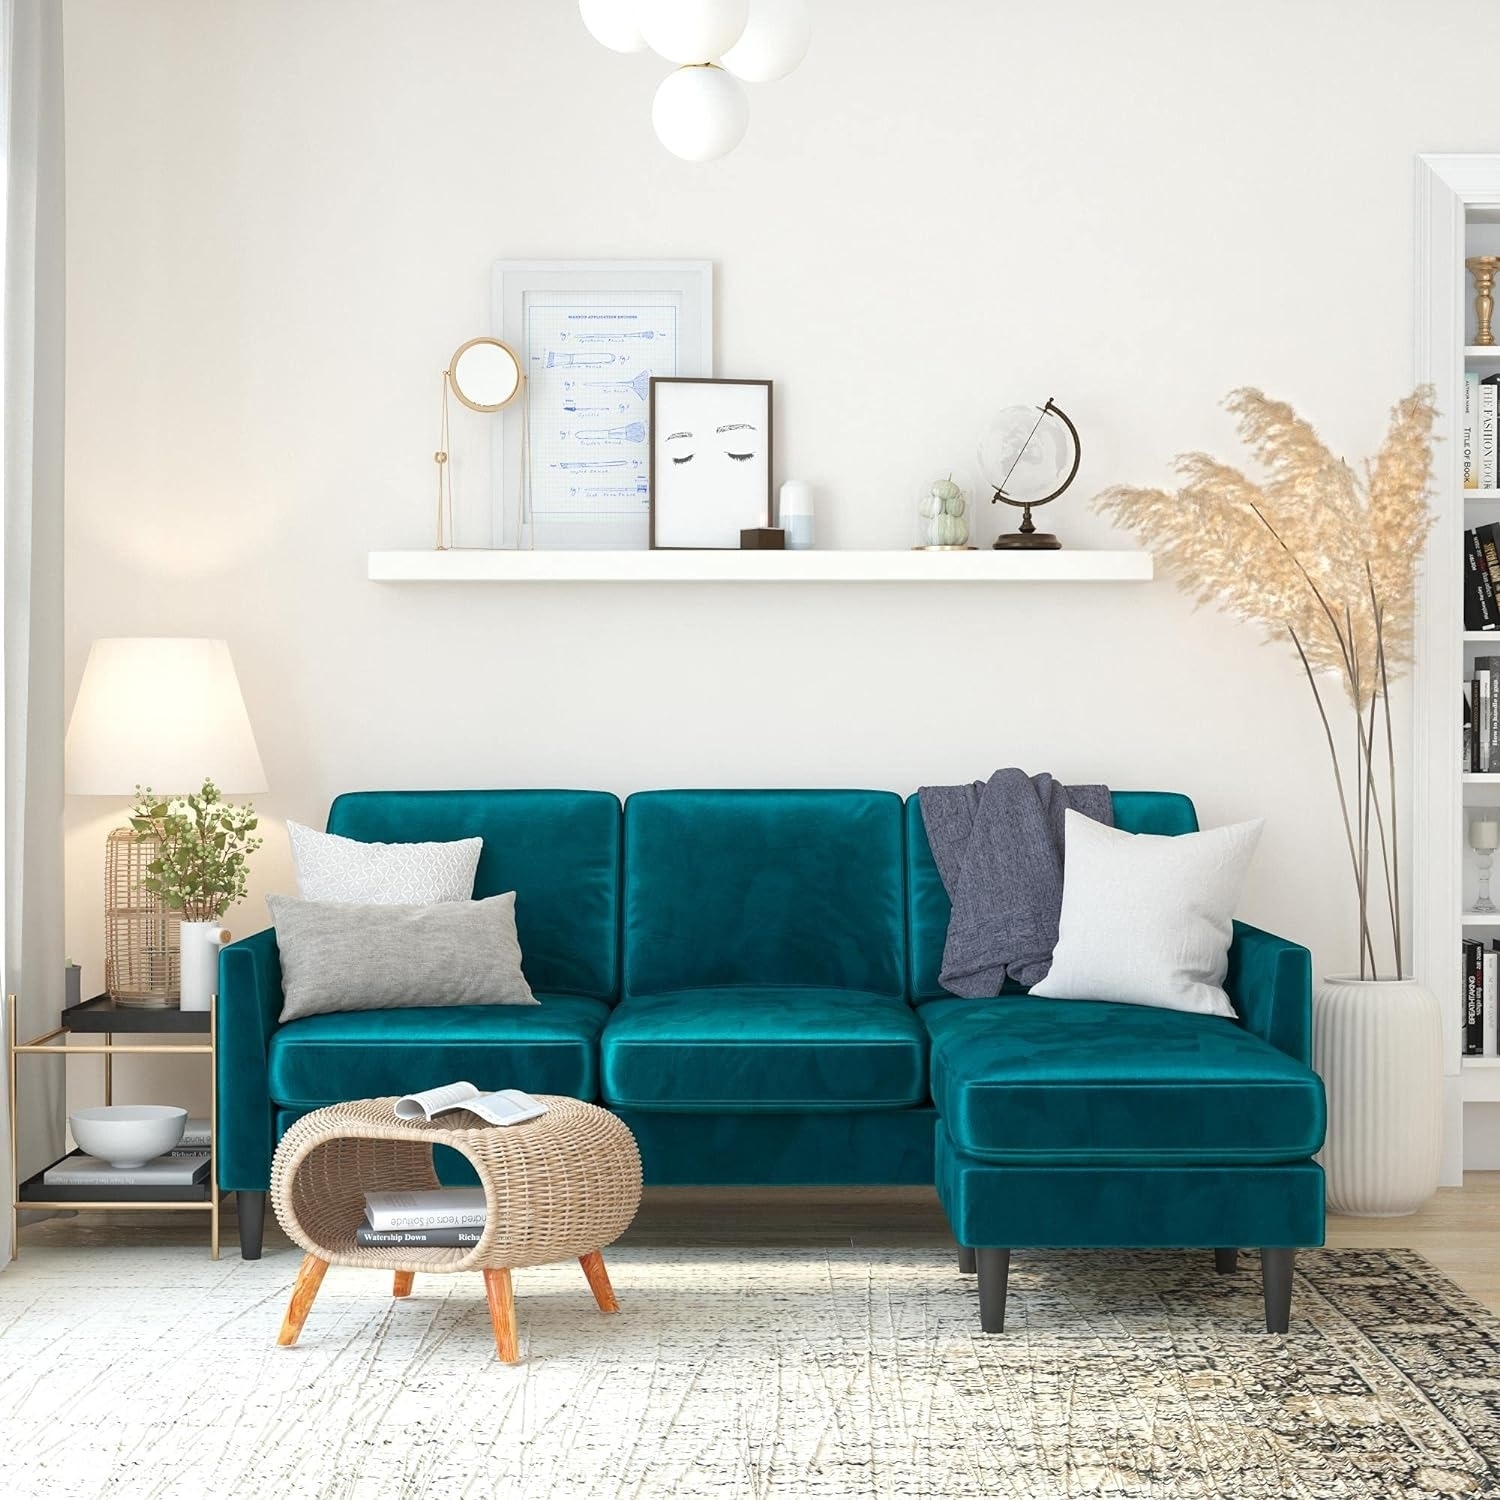 the teal couch